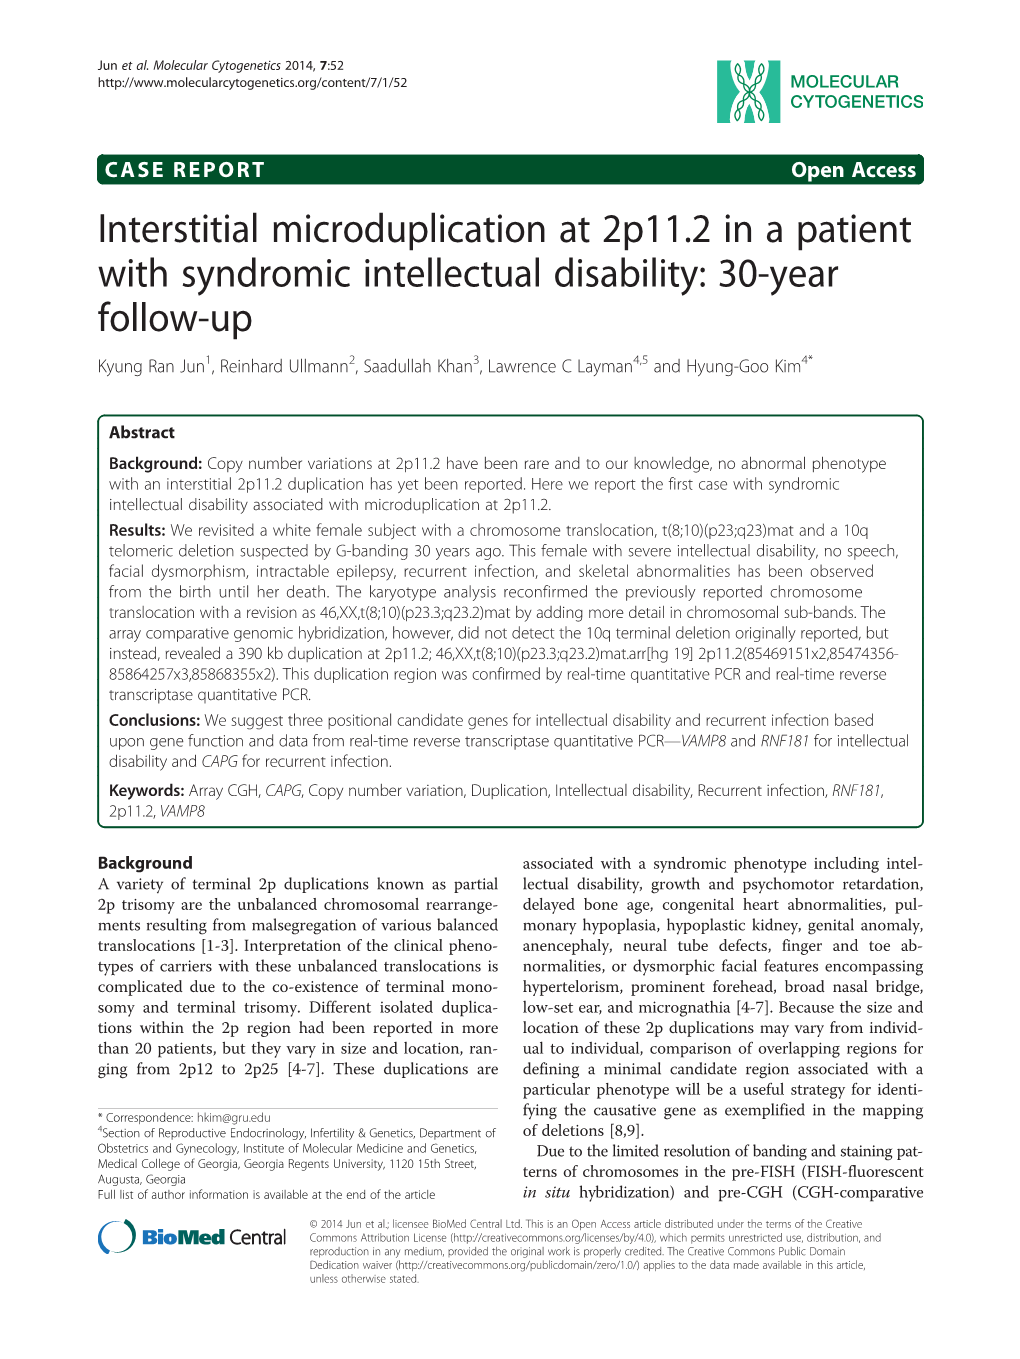 Interstitial Microduplication at 2P11.2 in a Patient With